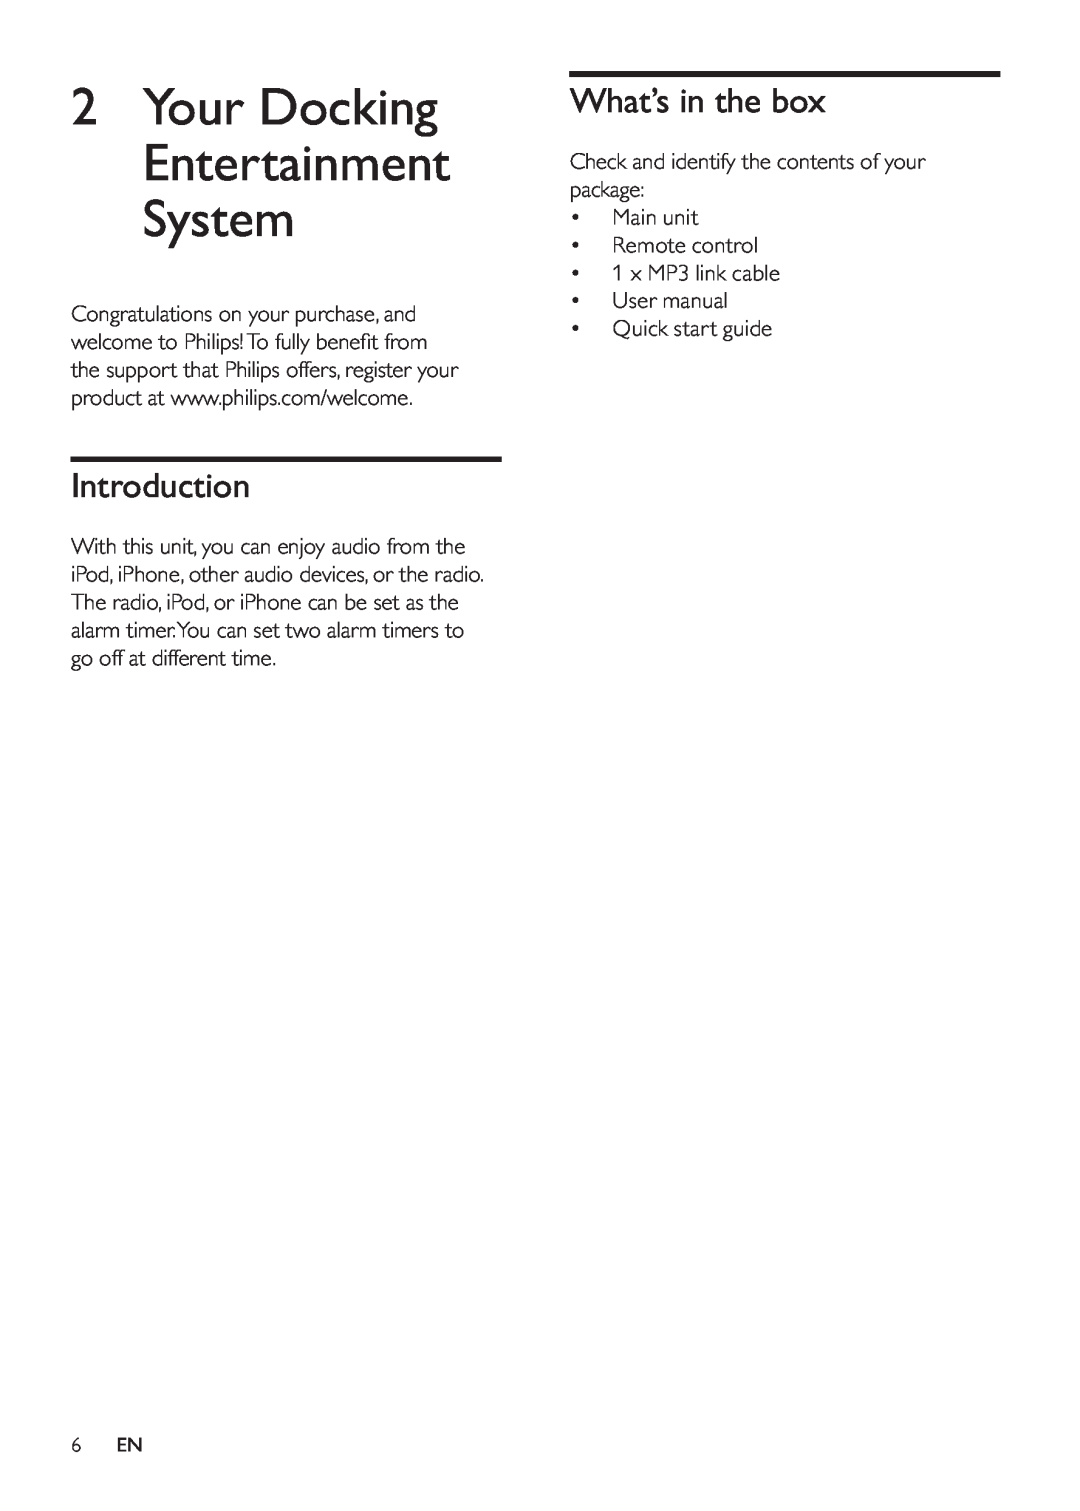 Philips DC290/12, DC290/61 user manual Introduction, What’s in the box, Your Docking Entertainment System, 6 EN 